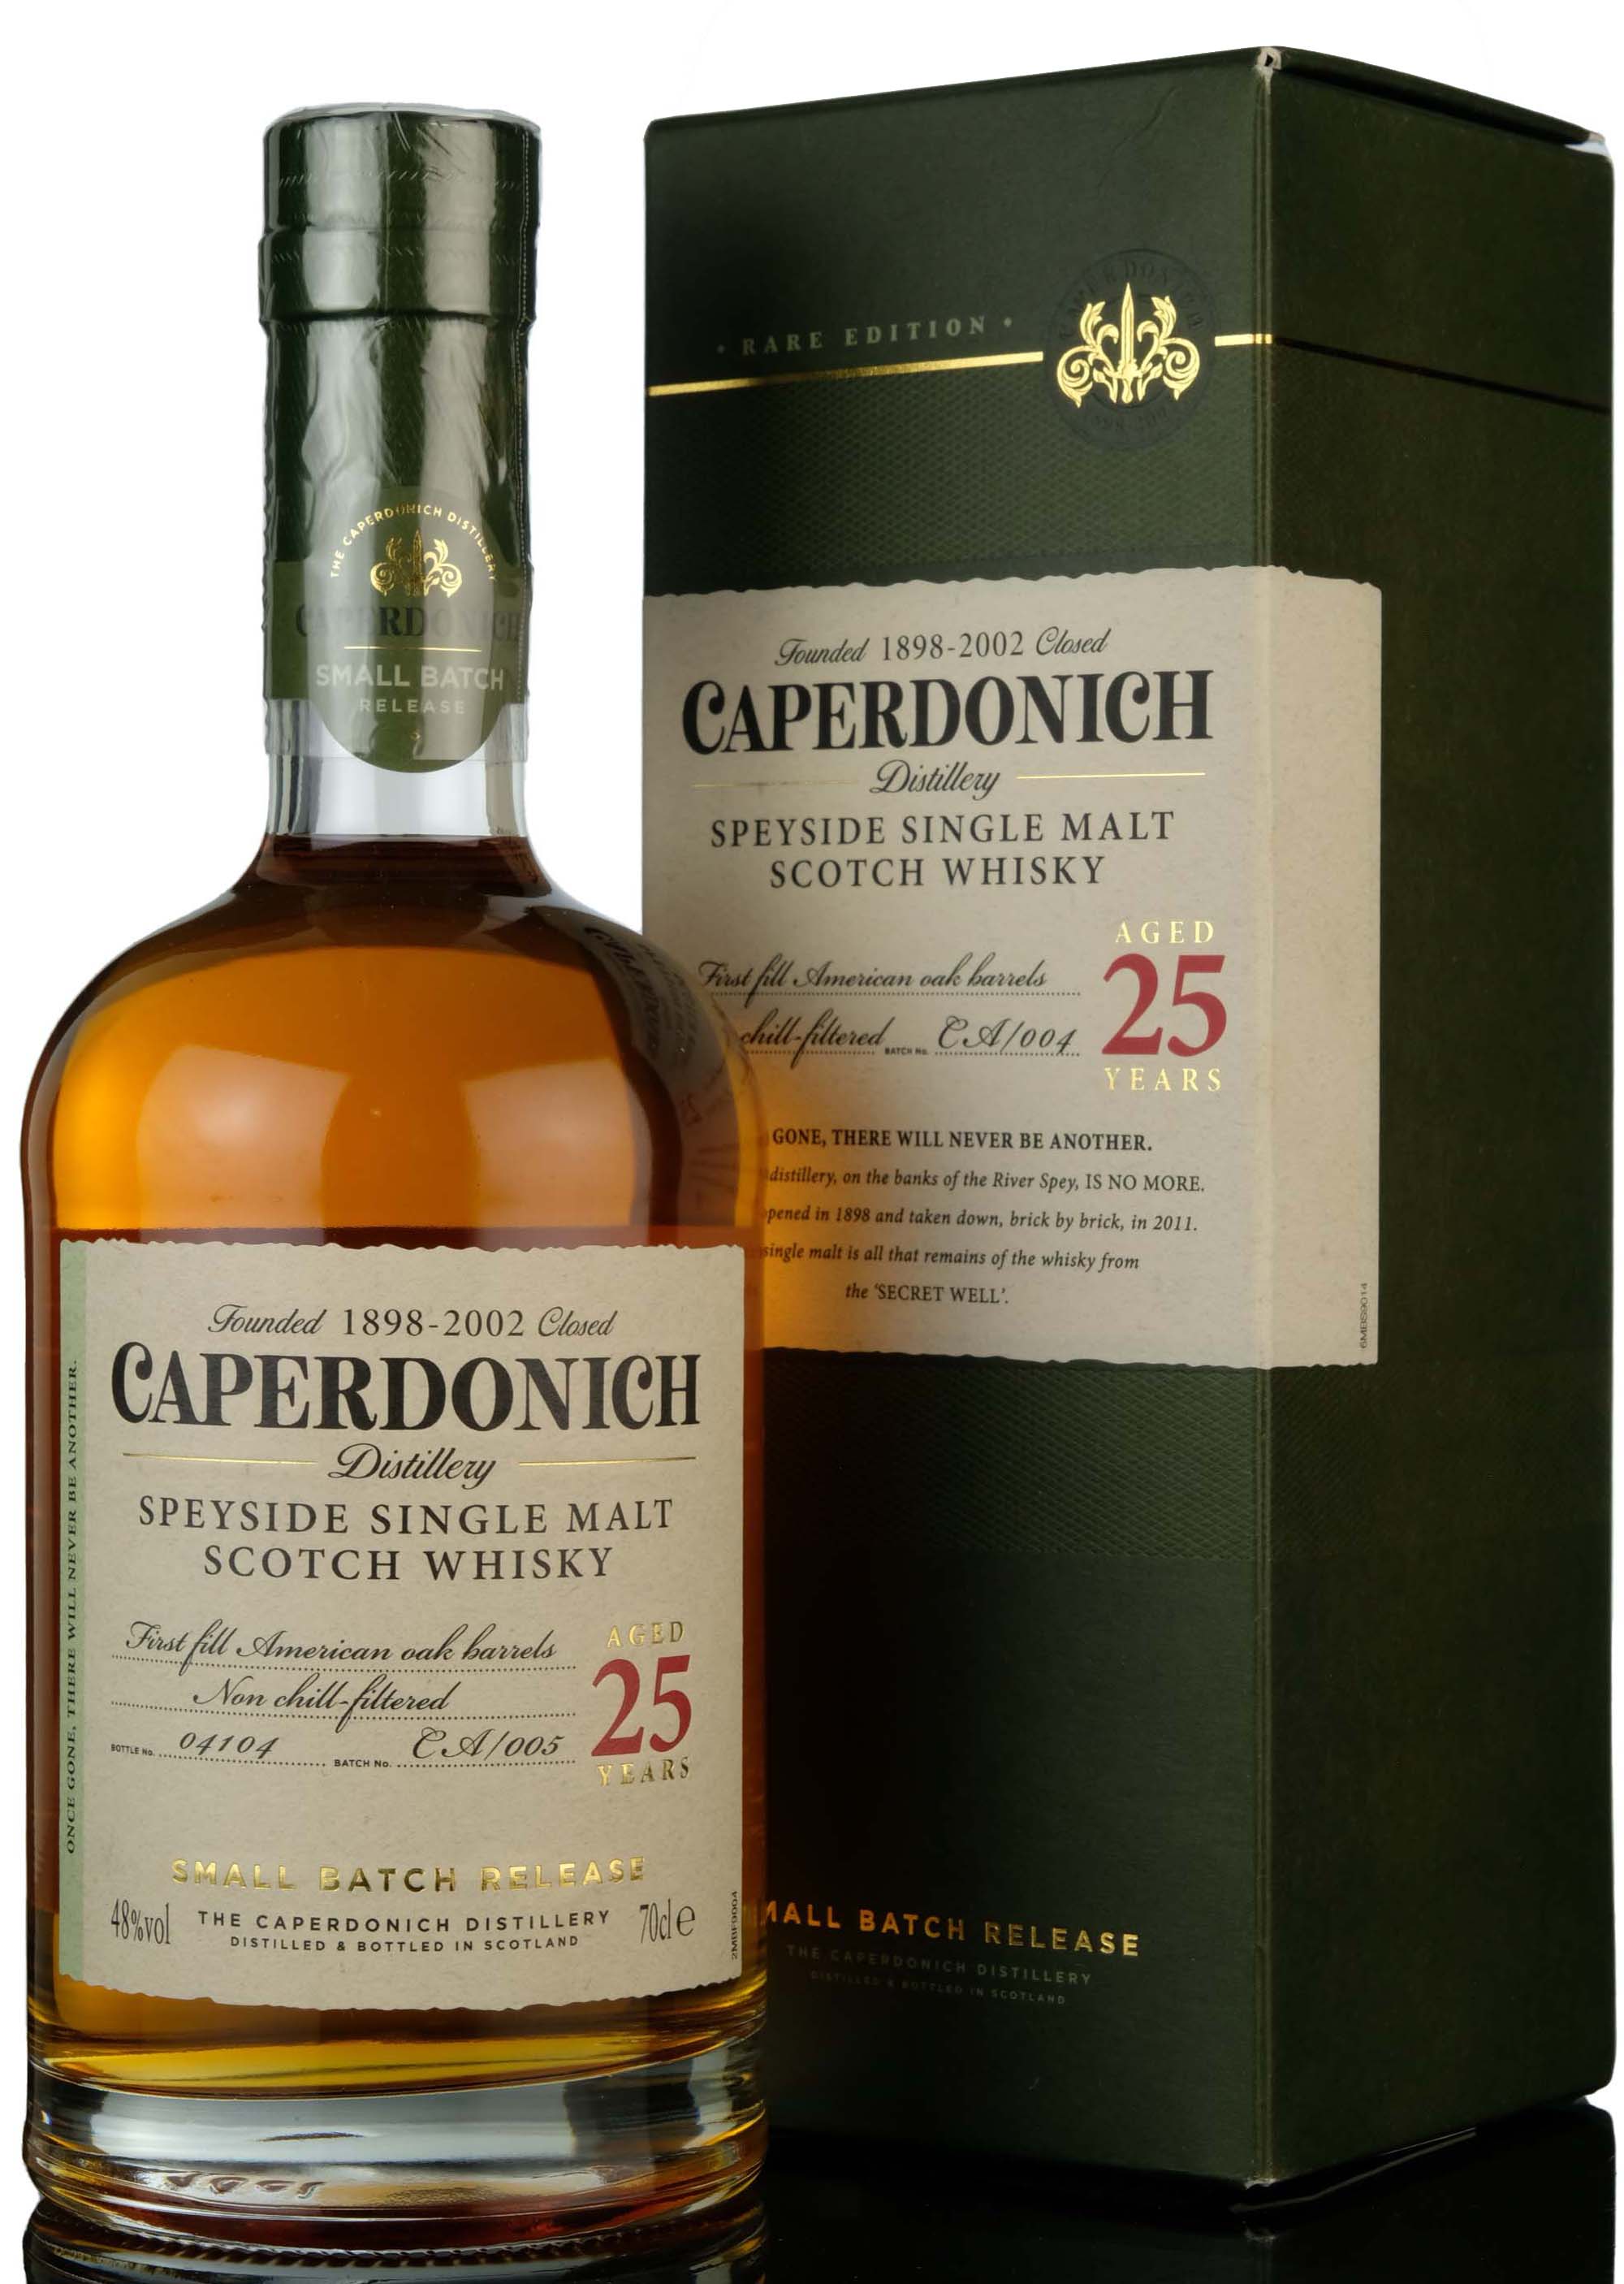 Caperdonich 25 Year Old - Small Batch Release CA/005 - 2022 Release